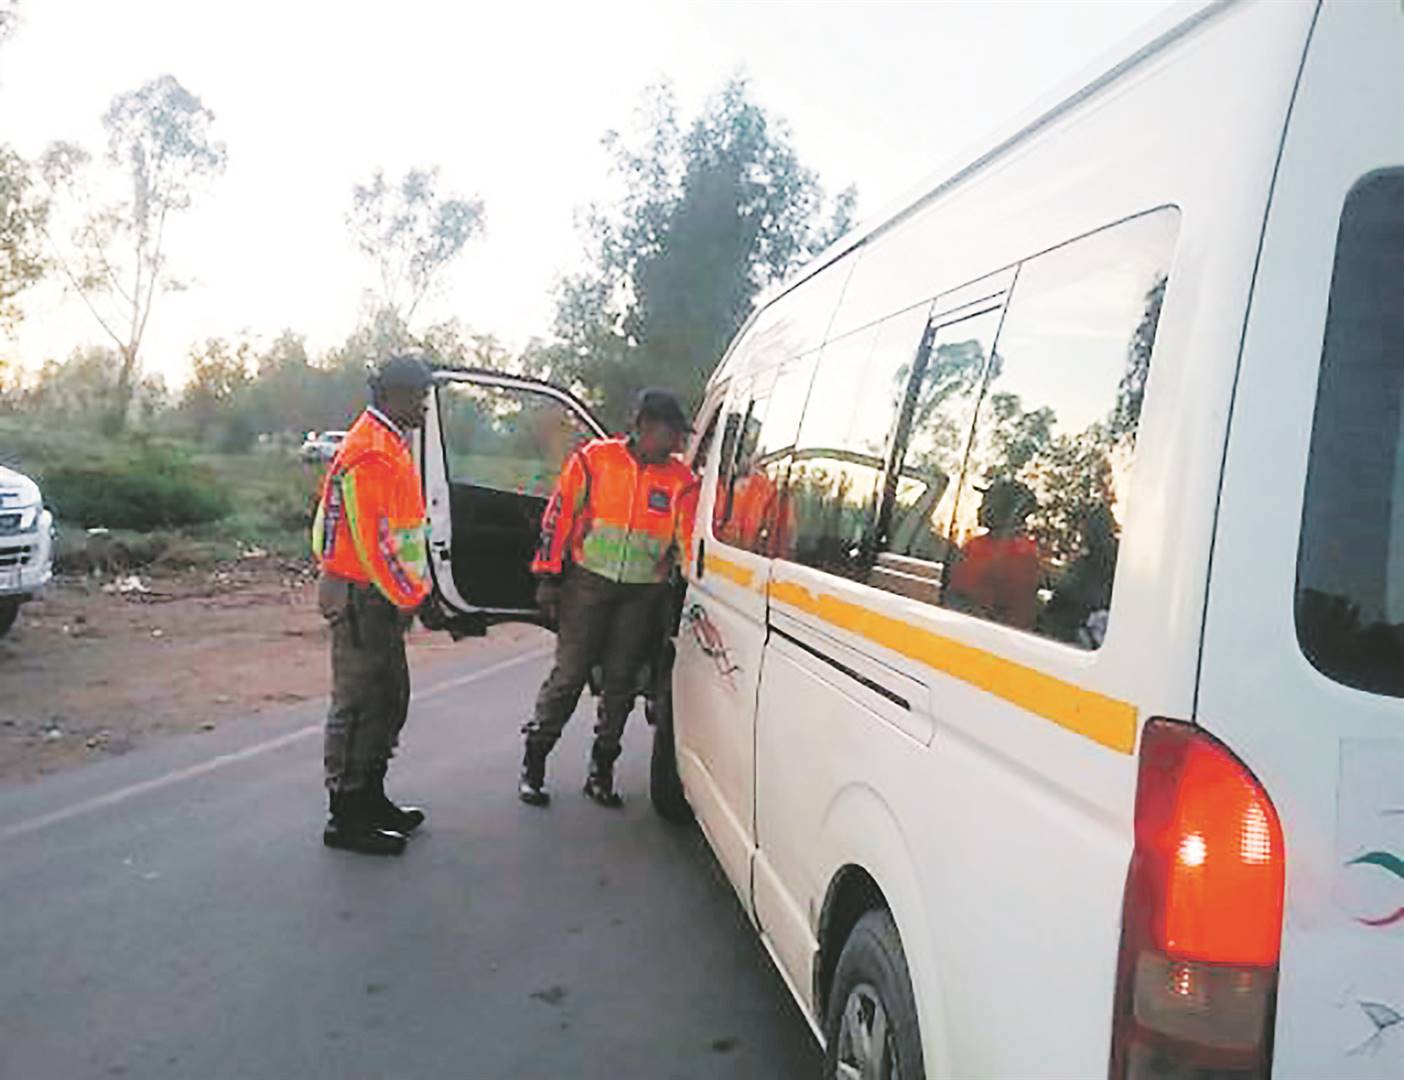 Metro cops stopping and searching a minibus taxi.